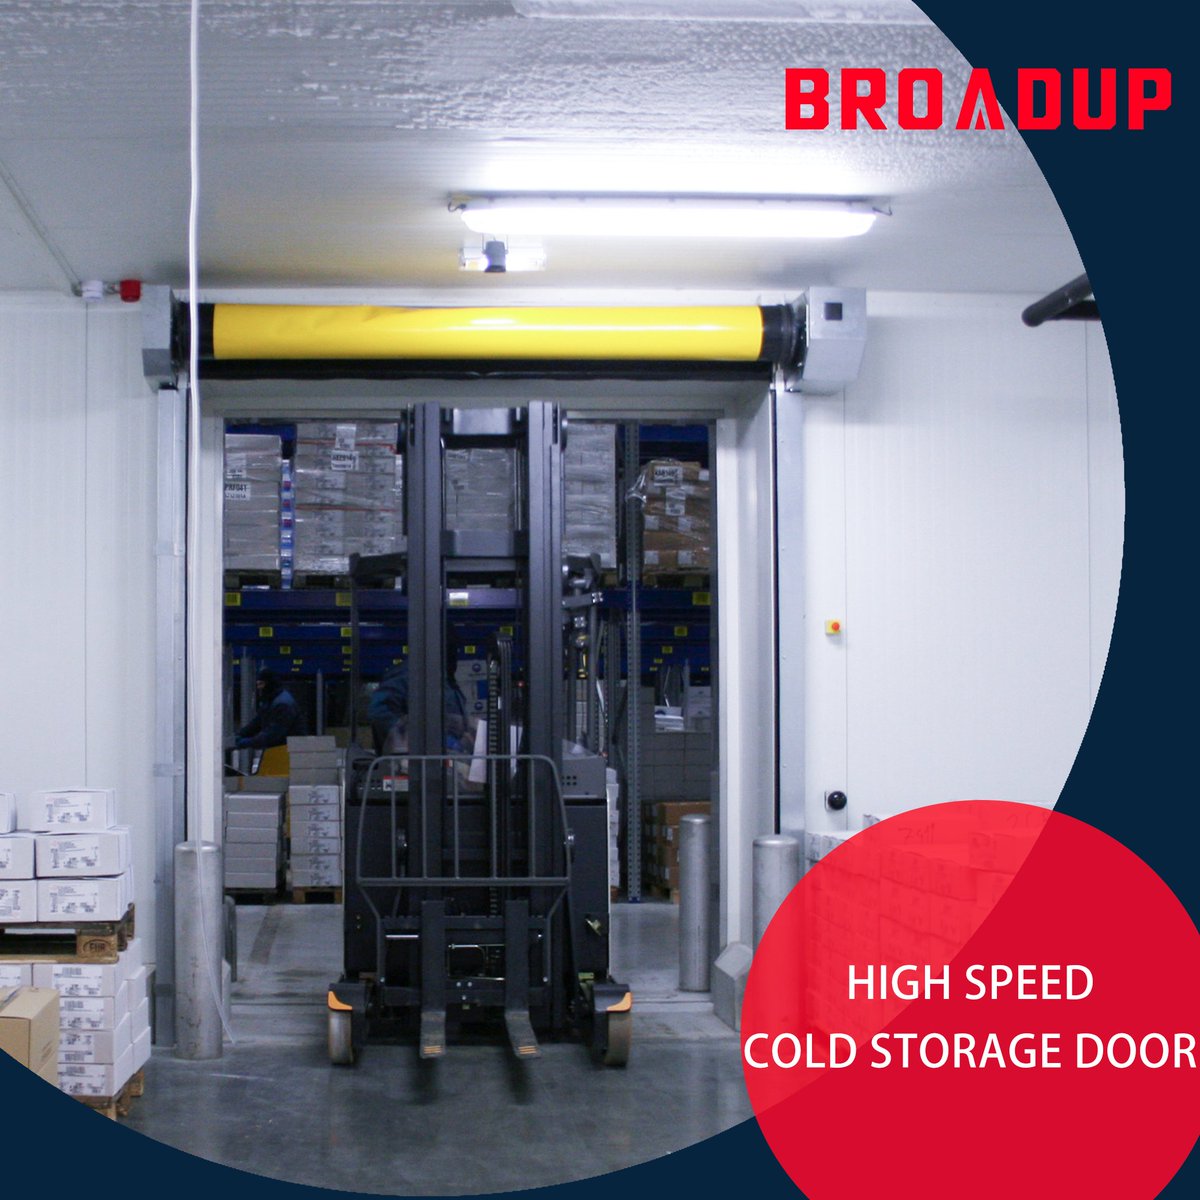 Reduce energy consumption and improve working efficiency with high-speed cold storage door. It is designed for safe and efficient access control for the freezer, cold logistic chain, etc. broadup.com.cn
#Doors #FAST #safety #Innovations #Efficiency  #energysavingtips